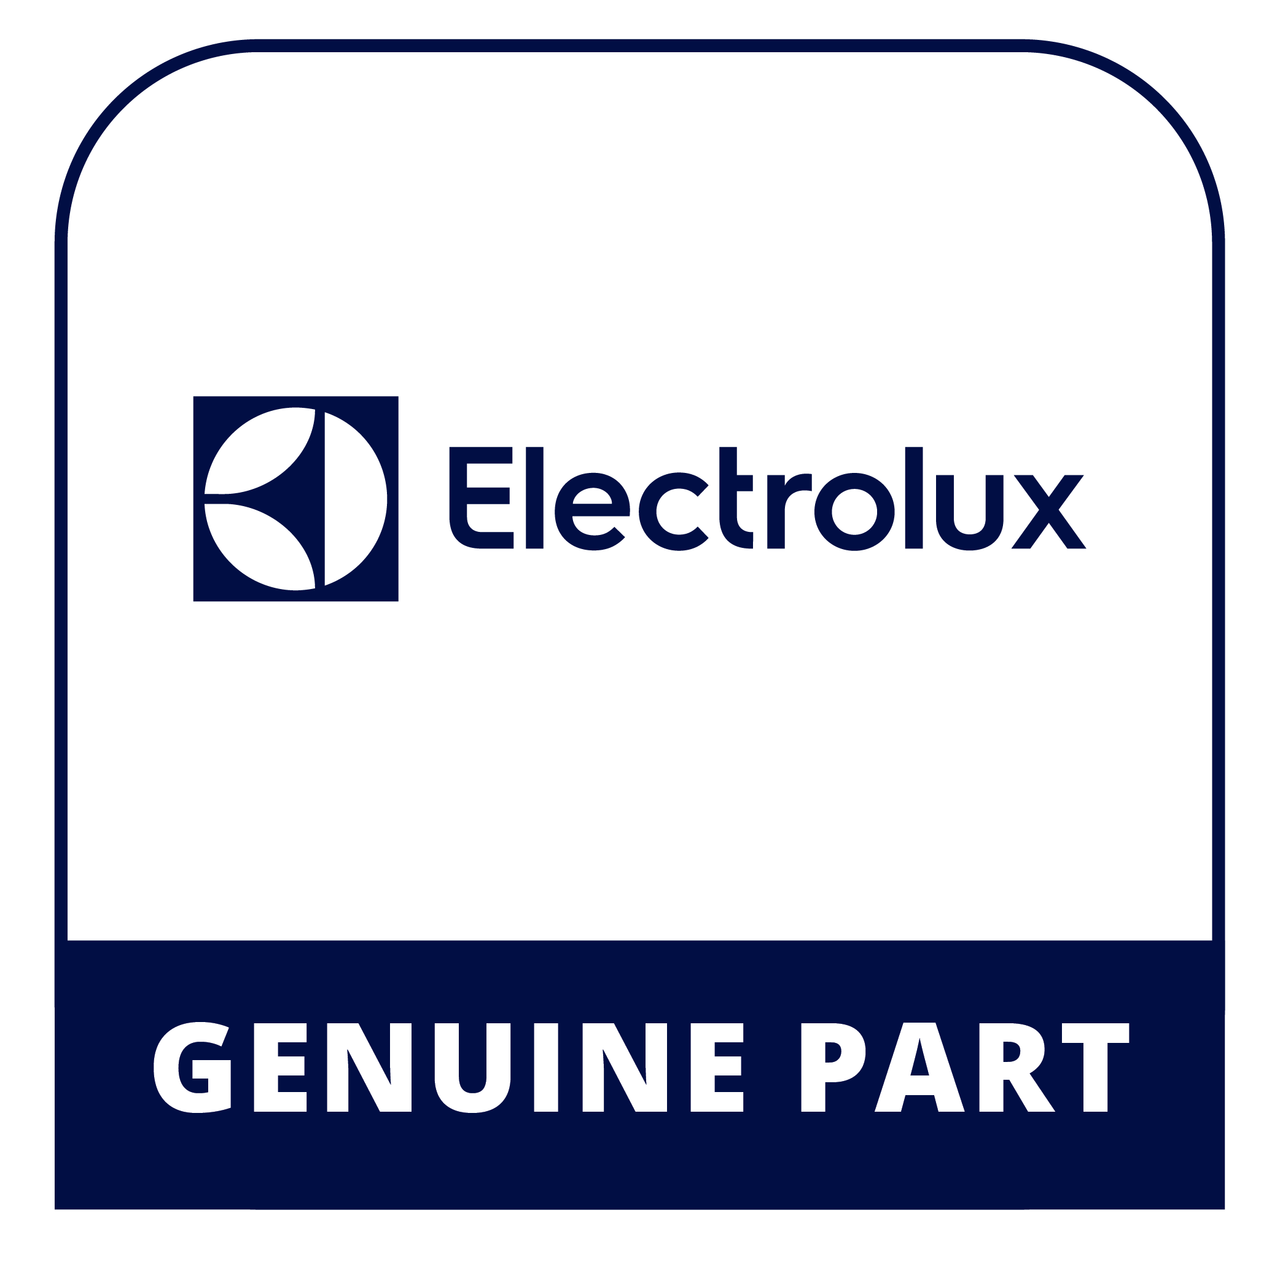 Frigidaire - Electrolux 316495154 Use & Care Guide - Genuine Electrolux Part